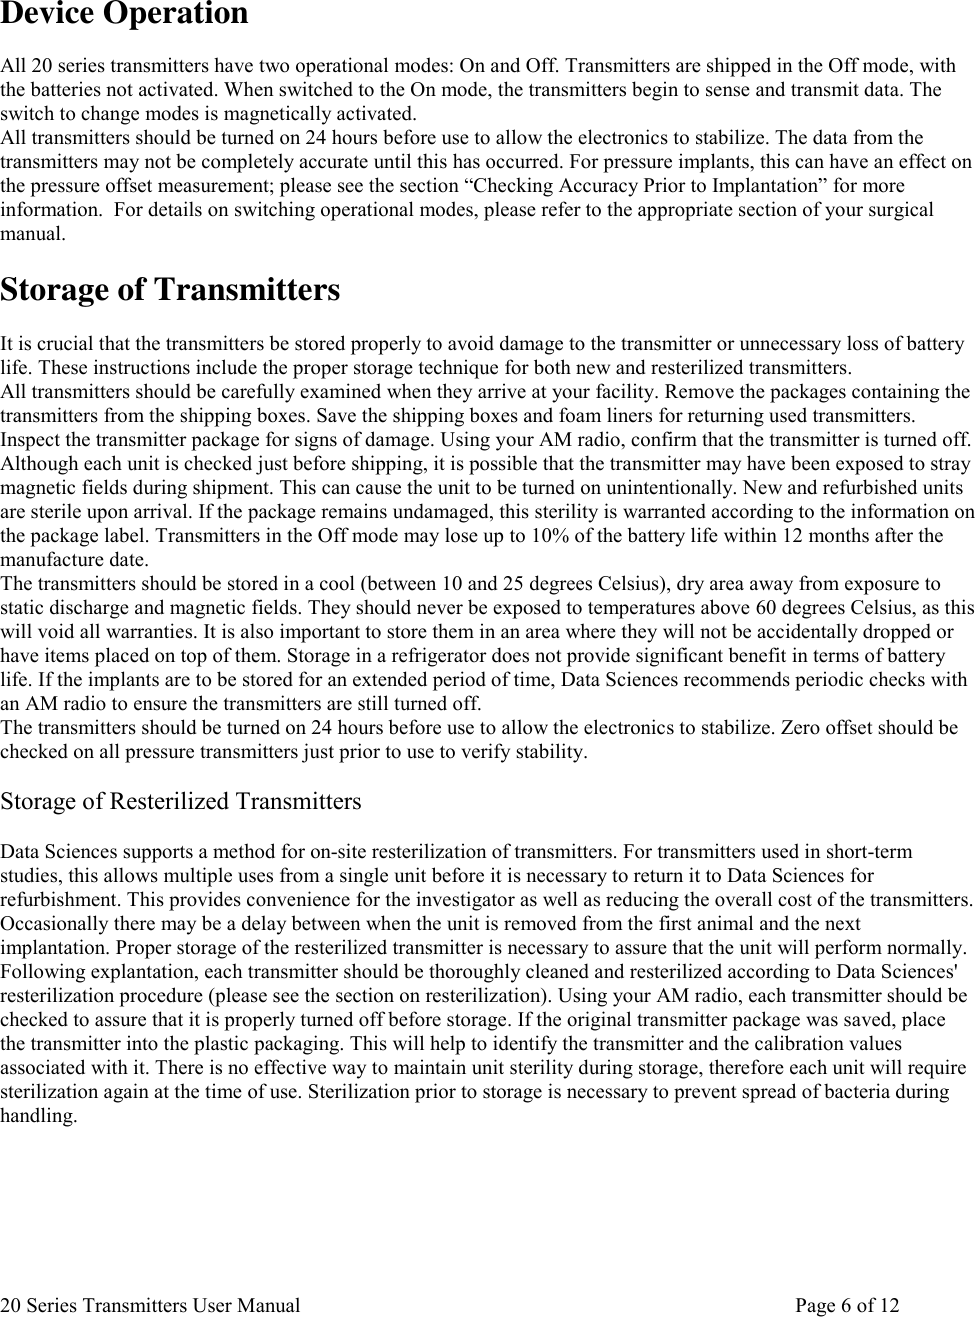 20 Series Transmitters User Manual       Page 6 of 12   Device Operation  All 20 series transmitters have two operational modes: On and Off. Transmitters are shipped in the Off mode, with the batteries not activated. When switched to the On mode, the transmitters begin to sense and transmit data. The switch to change modes is magnetically activated. All transmitters should be turned on 24 hours before use to allow the electronics to stabilize. The data from the transmitters may not be completely accurate until this has occurred. For pressure implants, this can have an effect on the pressure offset measurement; please see the section “Checking Accuracy Prior to Implantation” for more information.  For details on switching operational modes, please refer to the appropriate section of your surgical manual.  Storage of Transmitters  It is crucial that the transmitters be stored properly to avoid damage to the transmitter or unnecessary loss of battery life. These instructions include the proper storage technique for both new and resterilized transmitters.  All transmitters should be carefully examined when they arrive at your facility. Remove the packages containing the transmitters from the shipping boxes. Save the shipping boxes and foam liners for returning used transmitters.  Inspect the transmitter package for signs of damage. Using your AM radio, confirm that the transmitter is turned off. Although each unit is checked just before shipping, it is possible that the transmitter may have been exposed to stray magnetic fields during shipment. This can cause the unit to be turned on unintentionally. New and refurbished units are sterile upon arrival. If the package remains undamaged, this sterility is warranted according to the information on the package label. Transmitters in the Off mode may lose up to 10% of the battery life within 12 months after the manufacture date.  The transmitters should be stored in a cool (between 10 and 25 degrees Celsius), dry area away from exposure to static discharge and magnetic fields. They should never be exposed to temperatures above 60 degrees Celsius, as this will void all warranties. It is also important to store them in an area where they will not be accidentally dropped or have items placed on top of them. Storage in a refrigerator does not provide significant benefit in terms of battery life. If the implants are to be stored for an extended period of time, Data Sciences recommends periodic checks with an AM radio to ensure the transmitters are still turned off.  The transmitters should be turned on 24 hours before use to allow the electronics to stabilize. Zero offset should be checked on all pressure transmitters just prior to use to verify stability.   Storage of Resterilized Transmitters  Data Sciences supports a method for on-site resterilization of transmitters. For transmitters used in short-term studies, this allows multiple uses from a single unit before it is necessary to return it to Data Sciences for refurbishment. This provides convenience for the investigator as well as reducing the overall cost of the transmitters.  Occasionally there may be a delay between when the unit is removed from the first animal and the next implantation. Proper storage of the resterilized transmitter is necessary to assure that the unit will perform normally.  Following explantation, each transmitter should be thoroughly cleaned and resterilized according to Data Sciences&apos; resterilization procedure (please see the section on resterilization). Using your AM radio, each transmitter should be checked to assure that it is properly turned off before storage. If the original transmitter package was saved, place the transmitter into the plastic packaging. This will help to identify the transmitter and the calibration values associated with it. There is no effective way to maintain unit sterility during storage, therefore each unit will require sterilization again at the time of use. Sterilization prior to storage is necessary to prevent spread of bacteria during handling.        